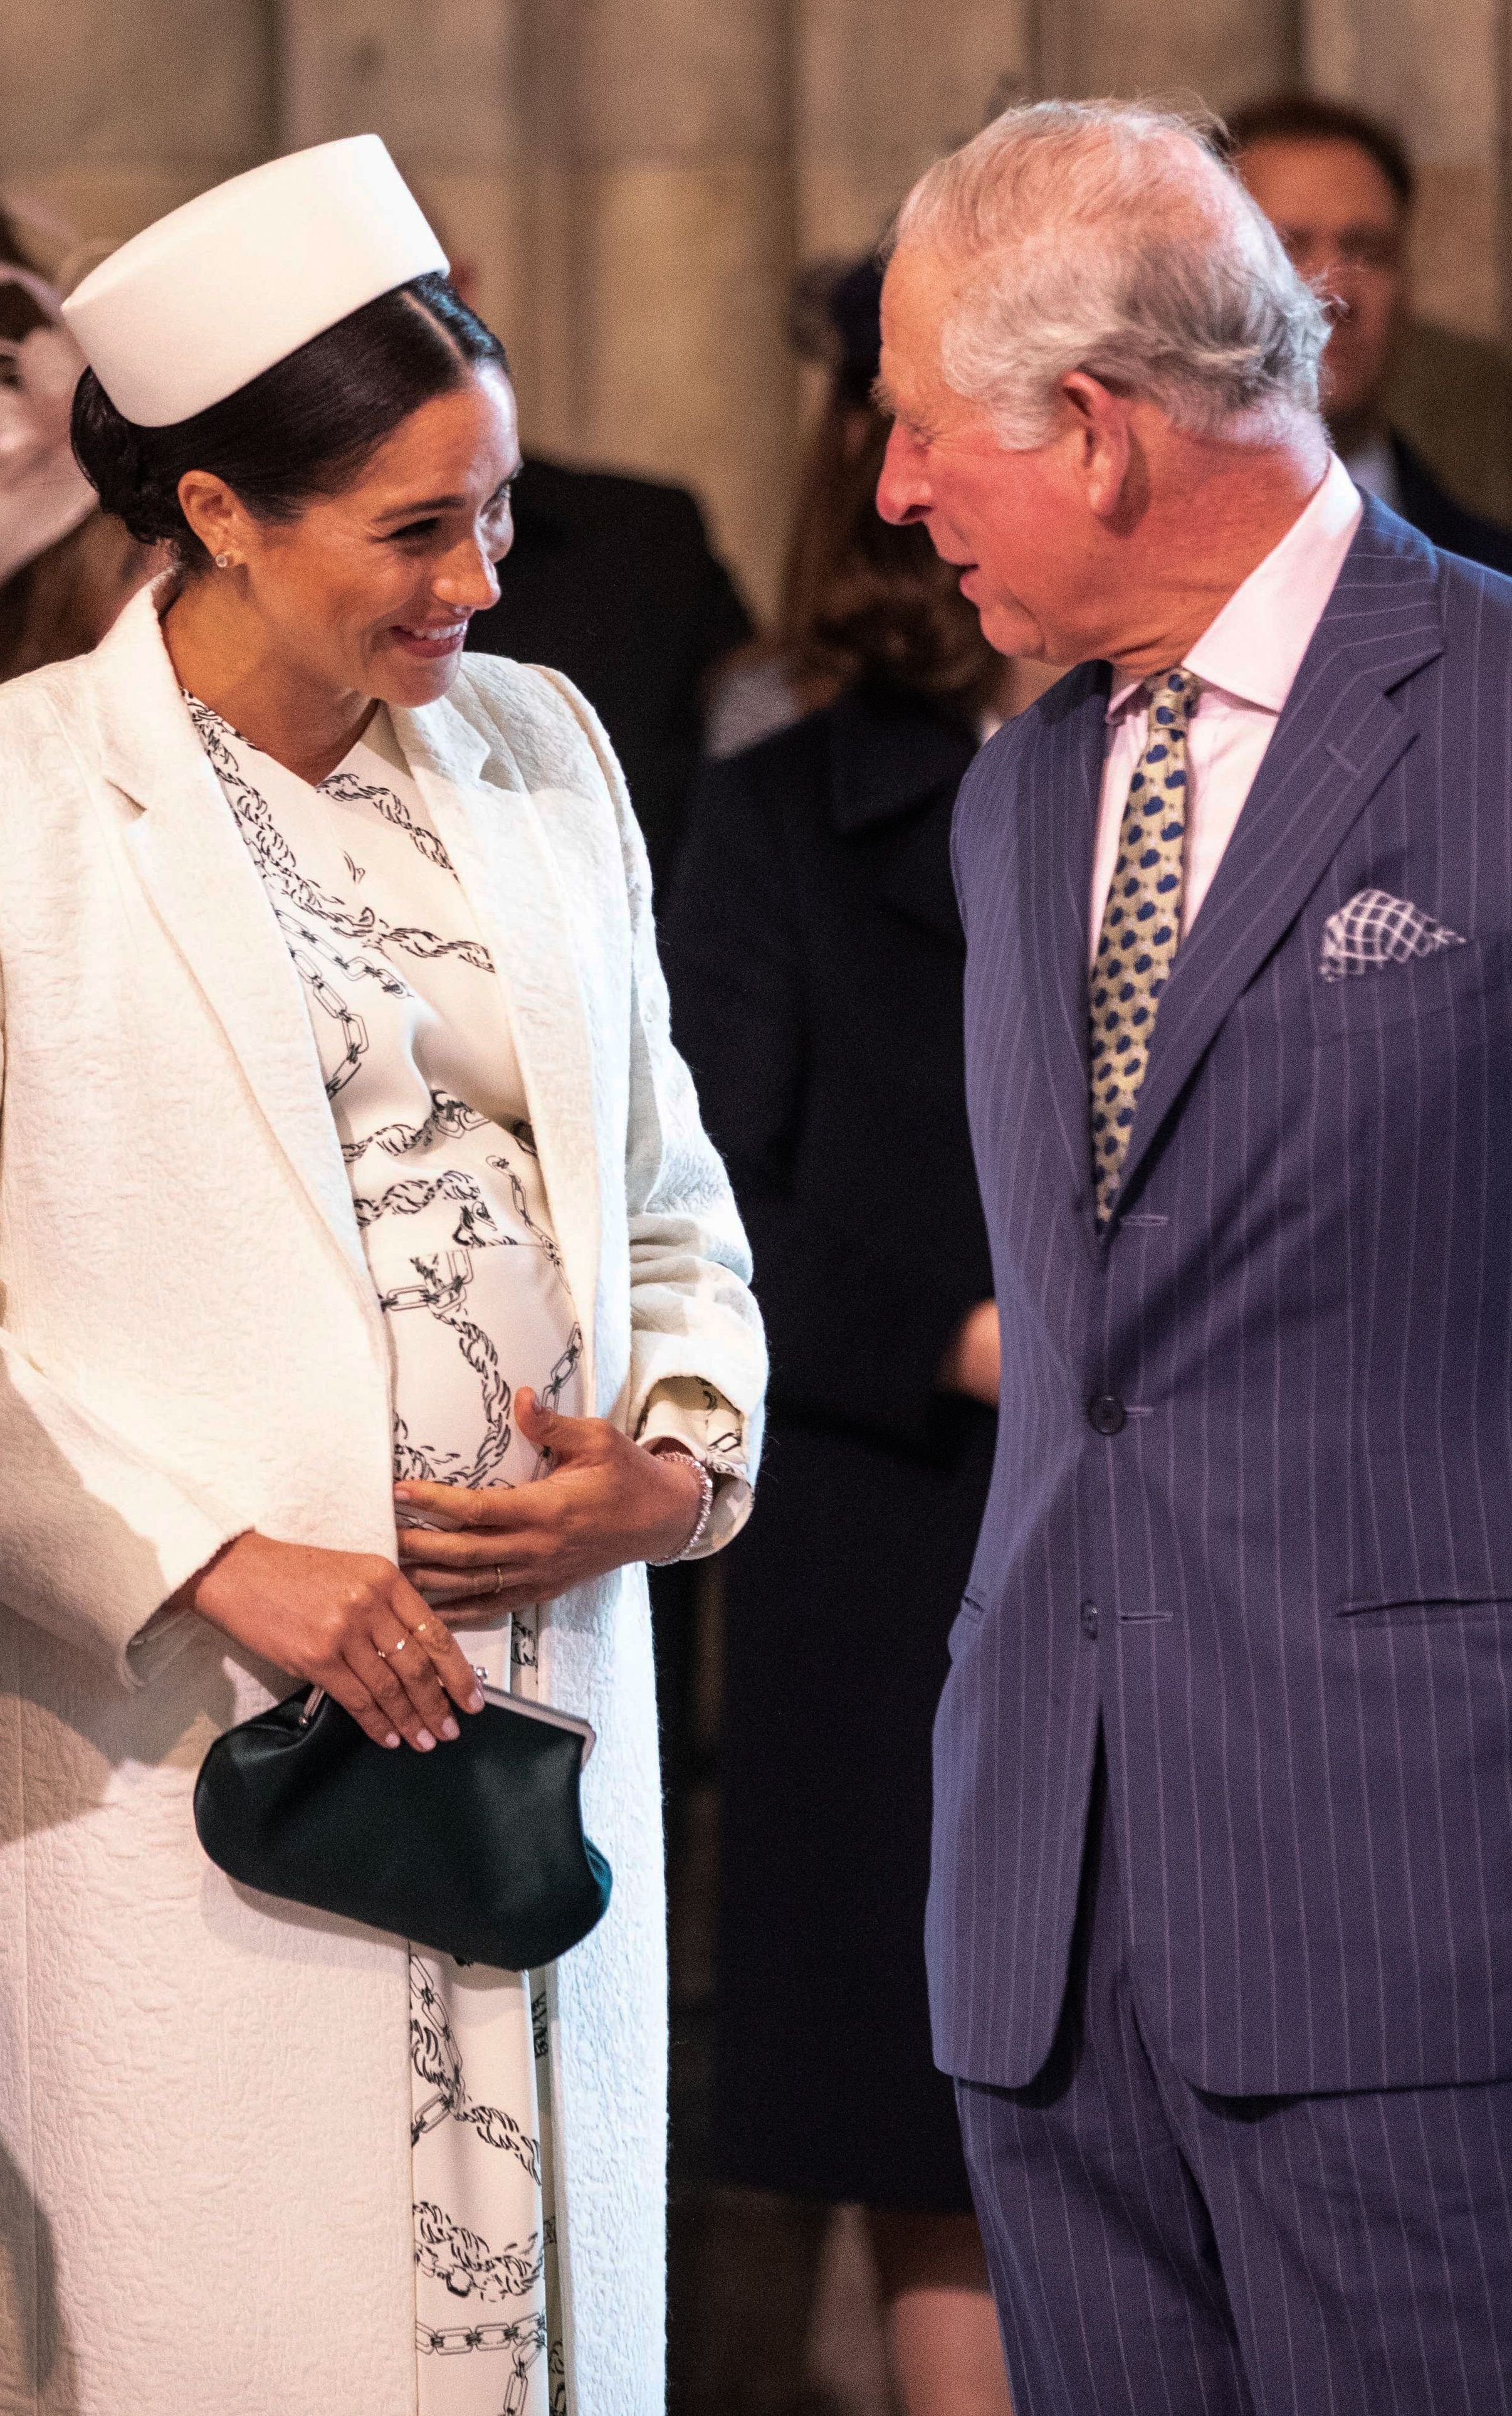 Britain's Meghan, Duchess of Sussex (L) talks with Britain's Prince Charles, Prince of Wales (R) as they attend the Commonwealth Day service at Westminster Abbey in London on March 11, 2019. - Britain | Source: Getty Images